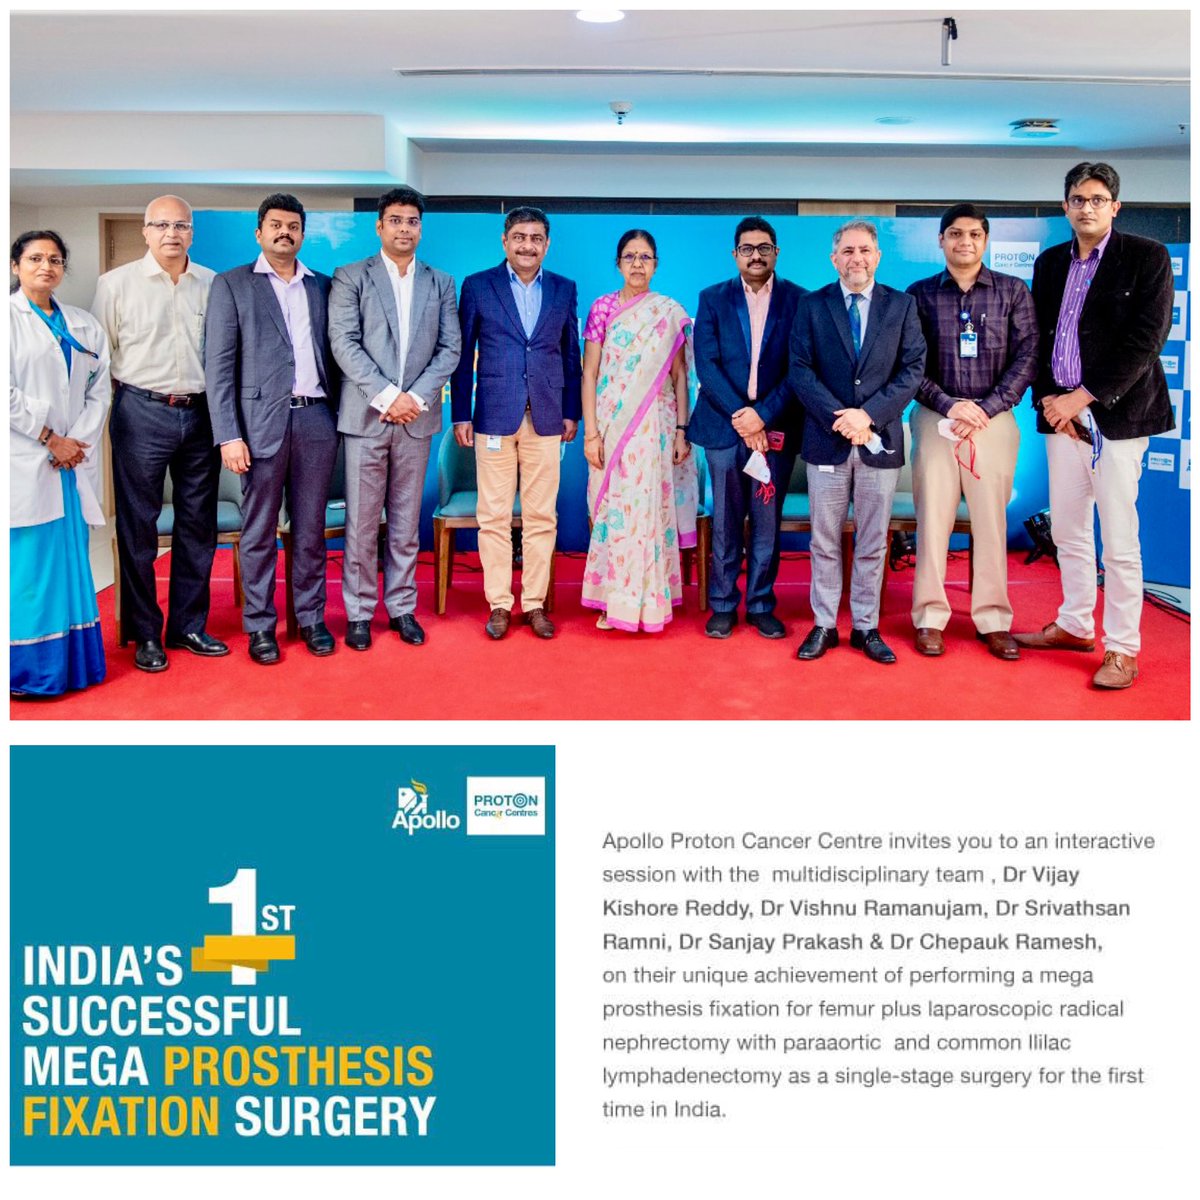 Proud to be part of India’s first Single Stage Laparoscopic Left Nephrectomy with Paraaortic and Common iliac Lymphadenectomy with Left Megaprosthesis fixation for femur in Apollo Proton Cancer Centre, Chennai. I immensely thank Dr Srivathsan Ramani for the opportunity.